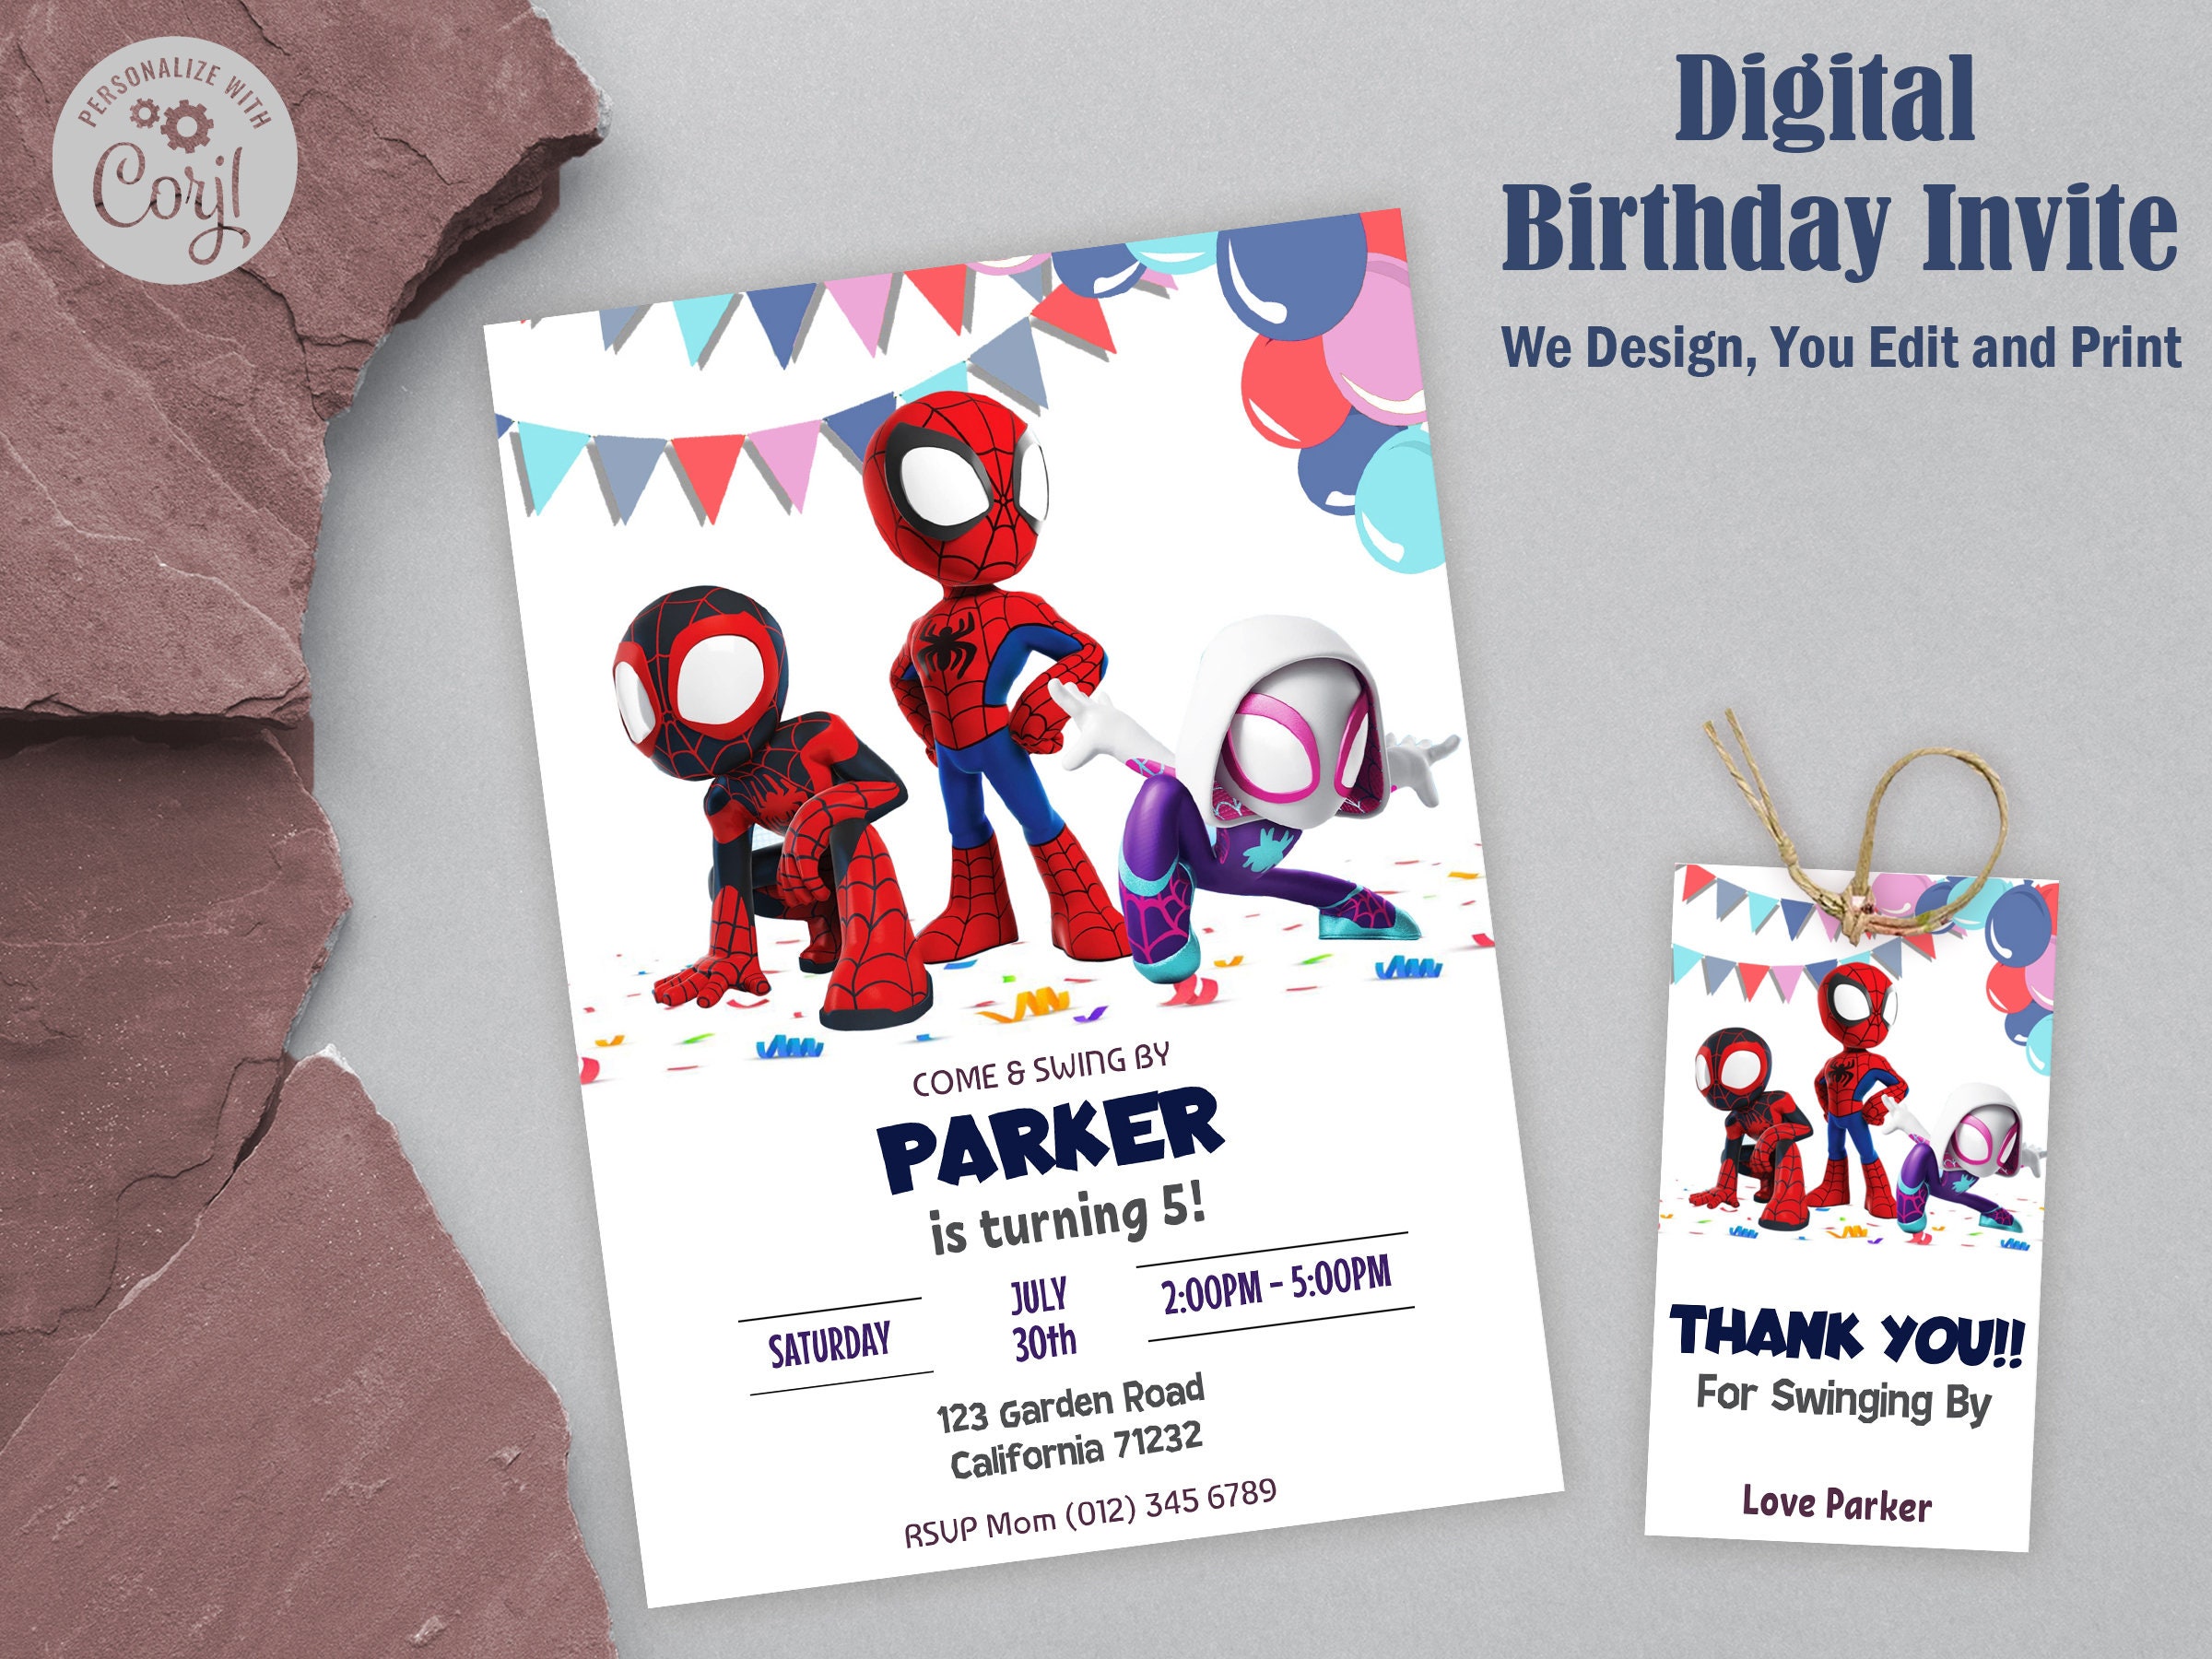 6 FREE Spidey and his amazing friends Invitations Templates for Birthdays